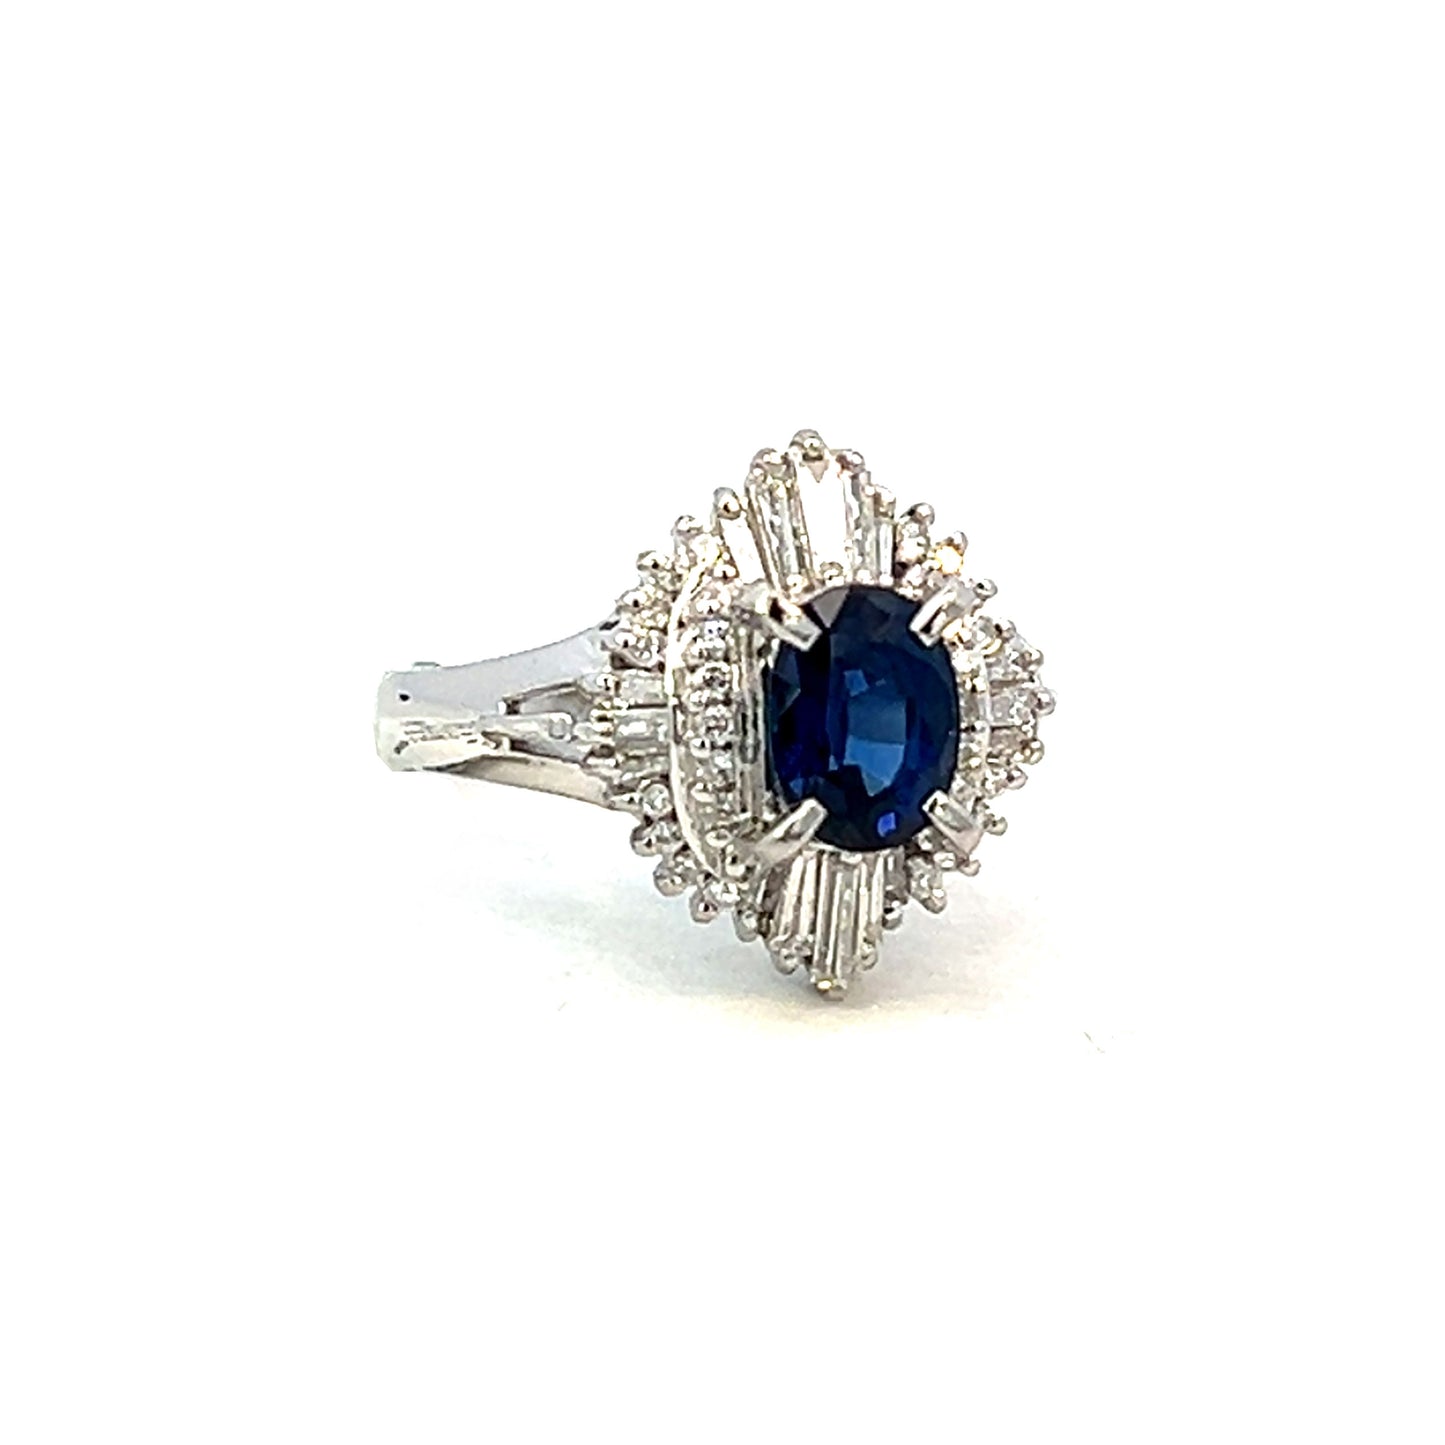 1.94cttw Oval Sapphire Ring | Platinum Ring |Sapphire and Diamond Ring